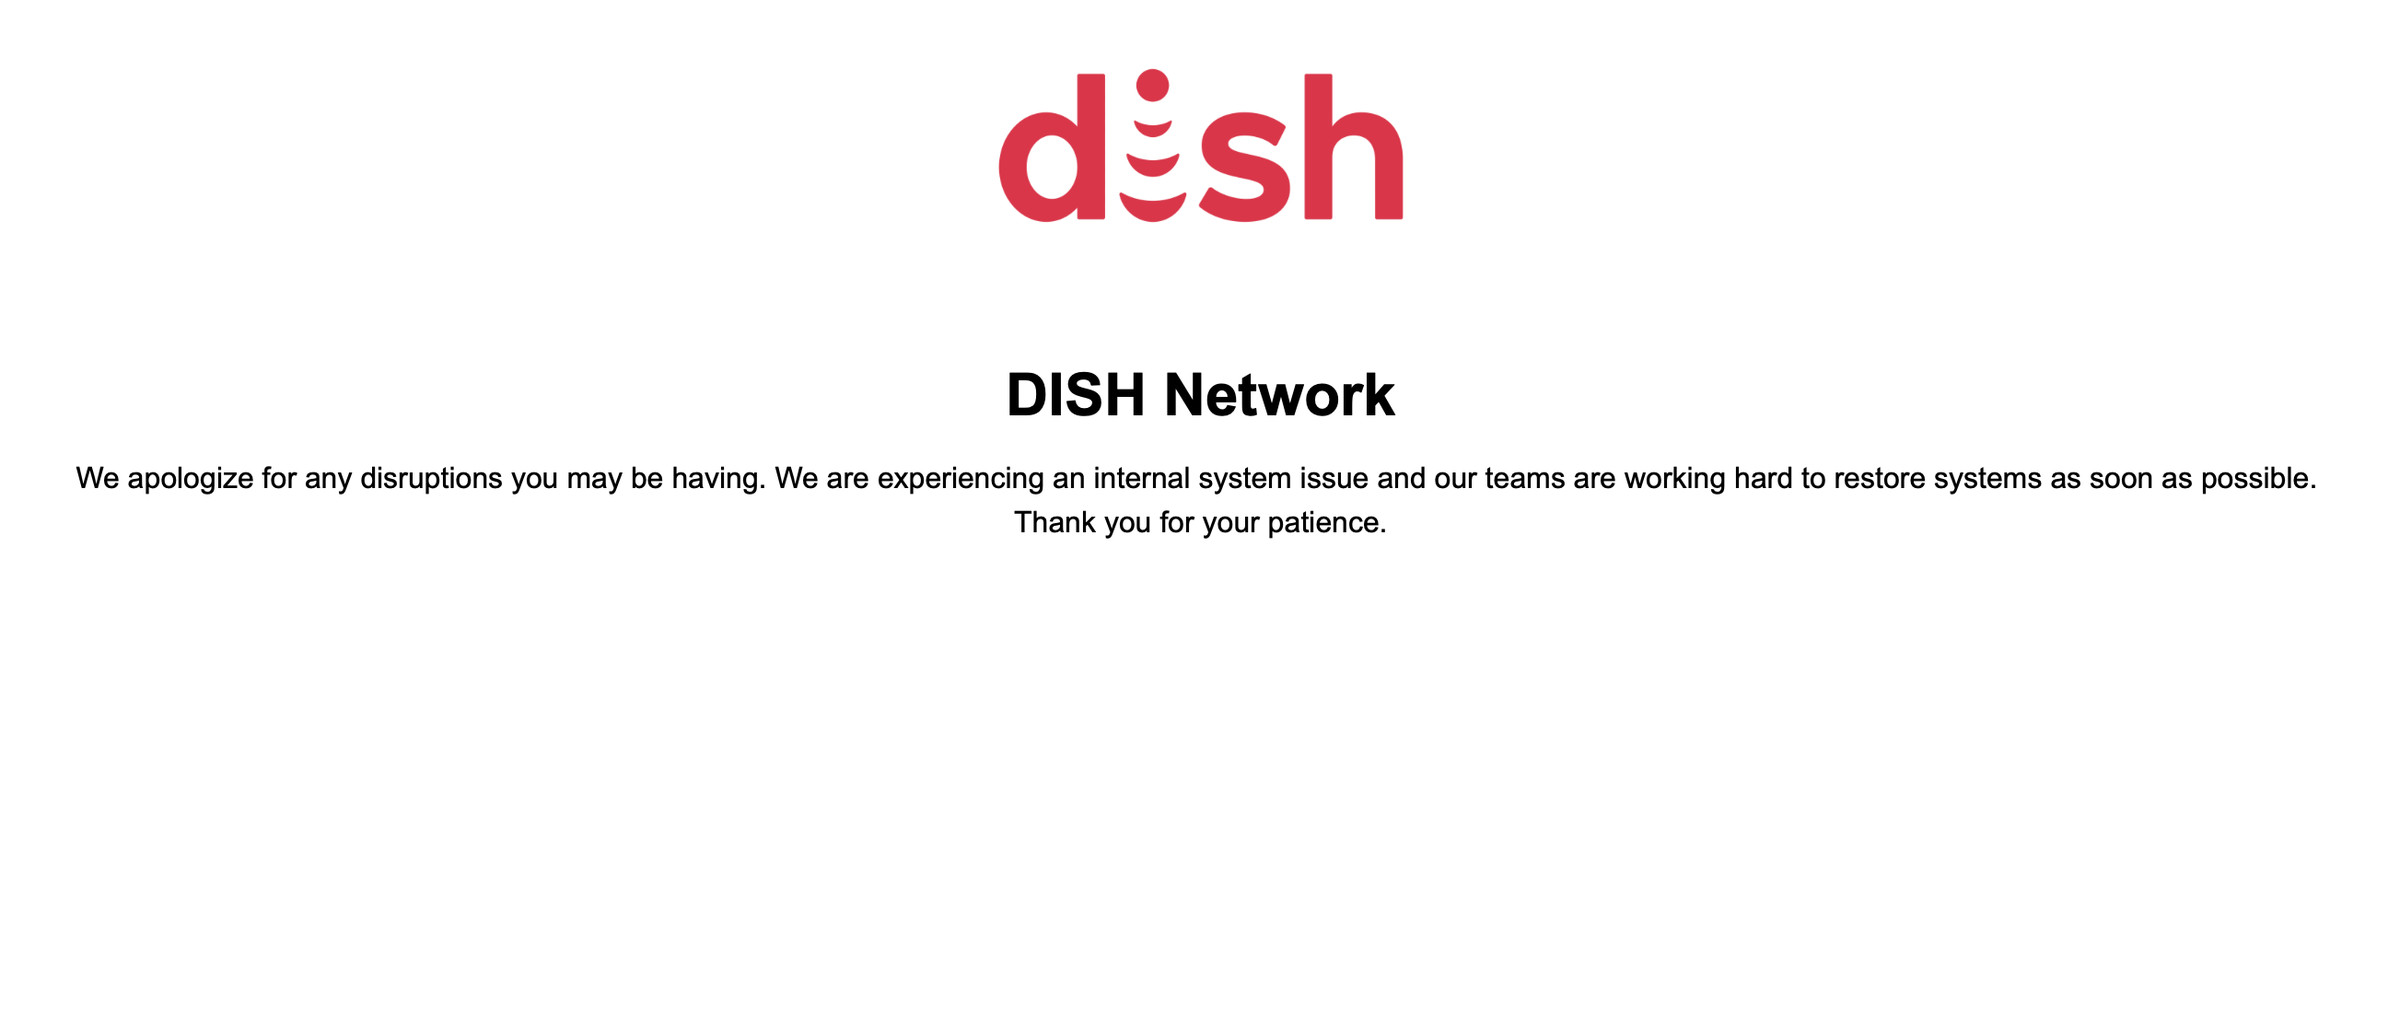 Screenshot of Dish’s website with the text: “We apologize for any disruptions you may be having. We are experiencing an internal system issue and our teams are working hard to restore systems as soon as possible. Thank you for your patience.”